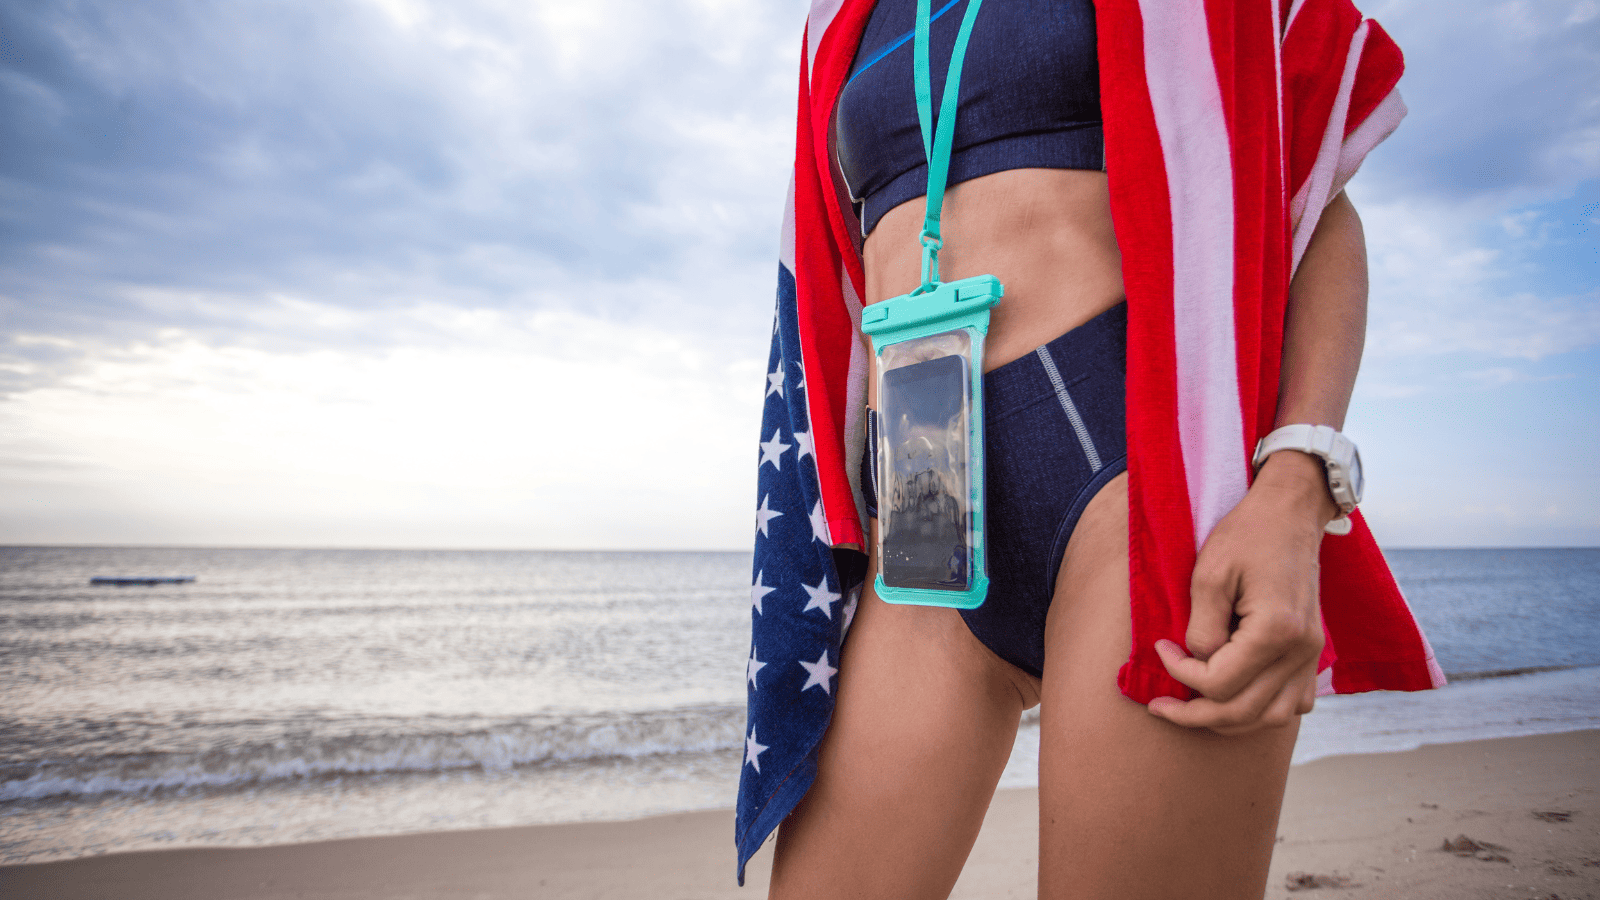 Woman with waterproof phone case on beach